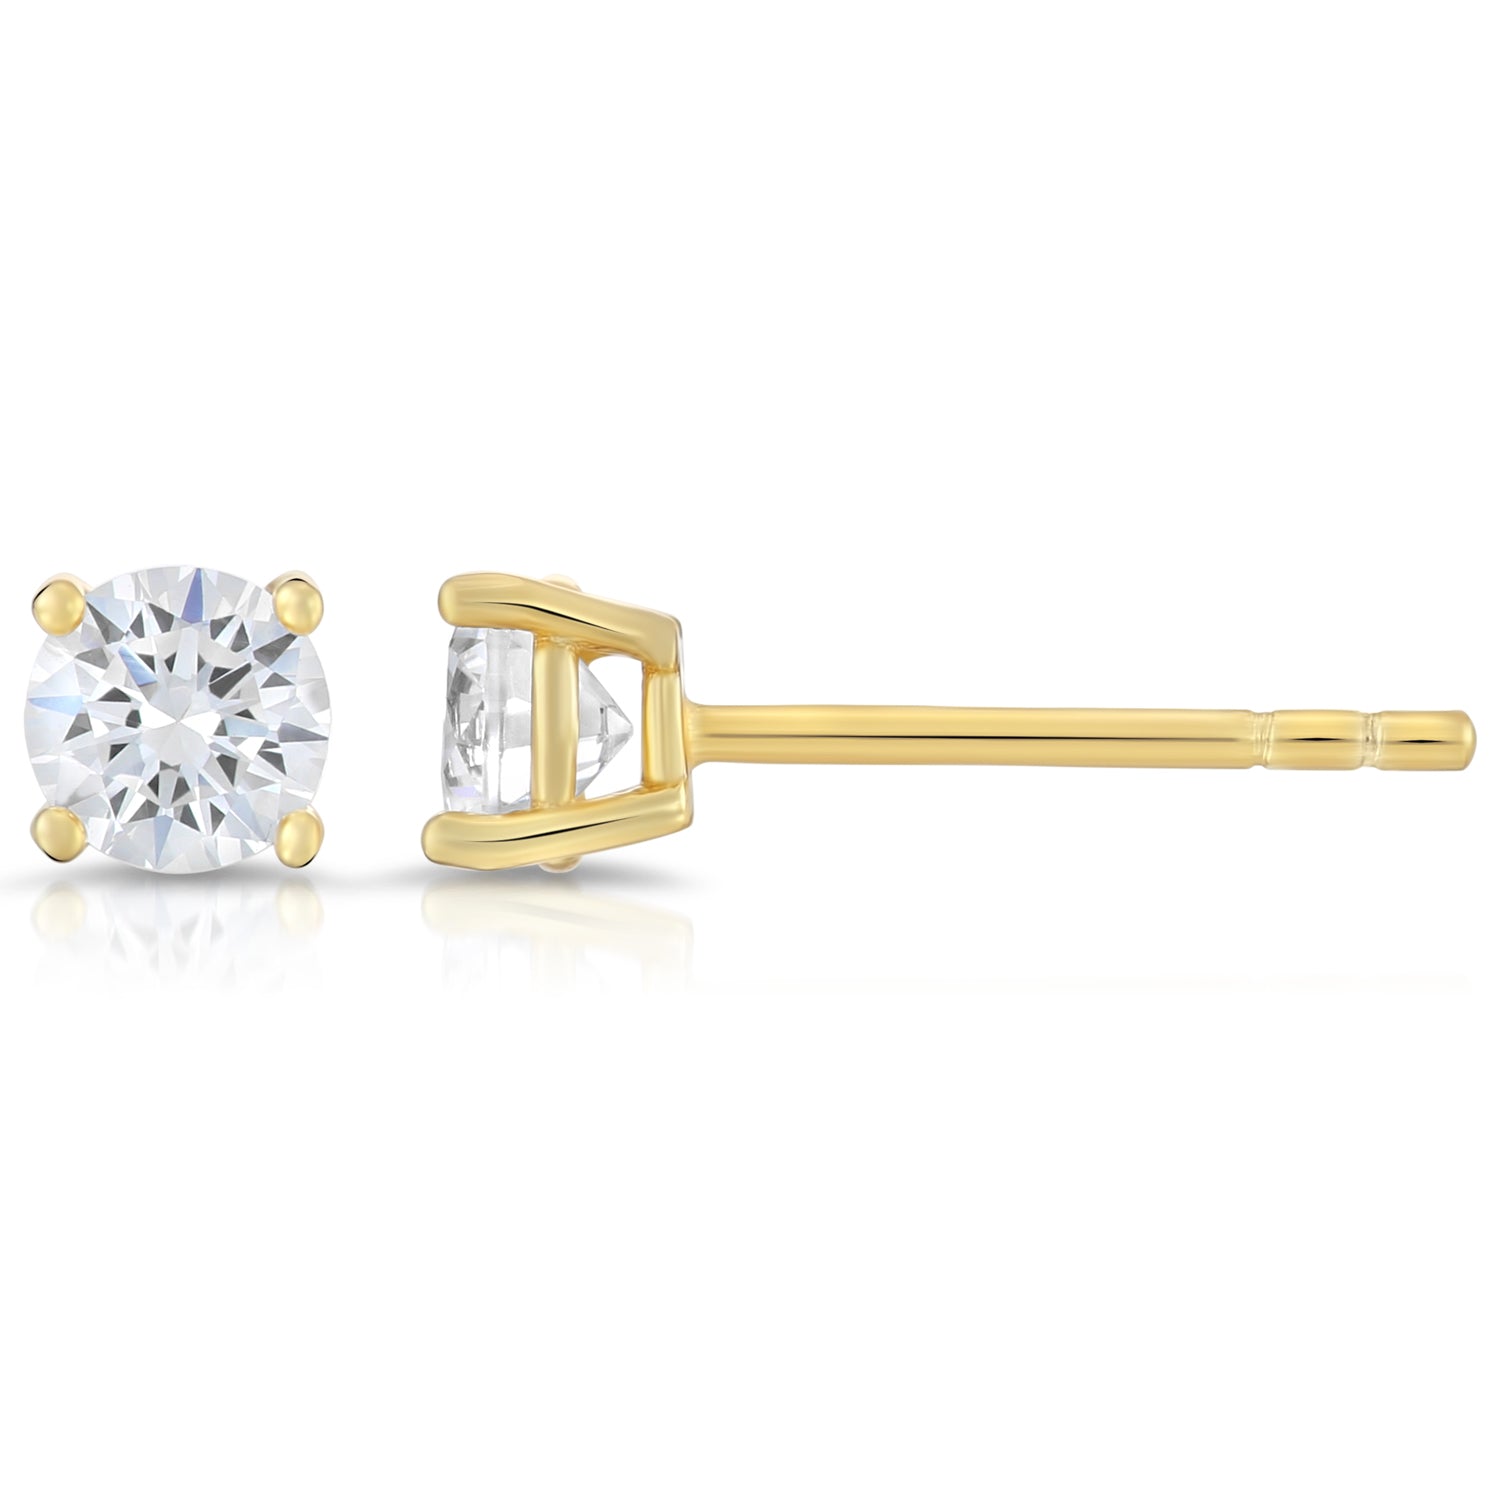 Pure Sterling Silver Stud Earrings, Yellow Gold Plated